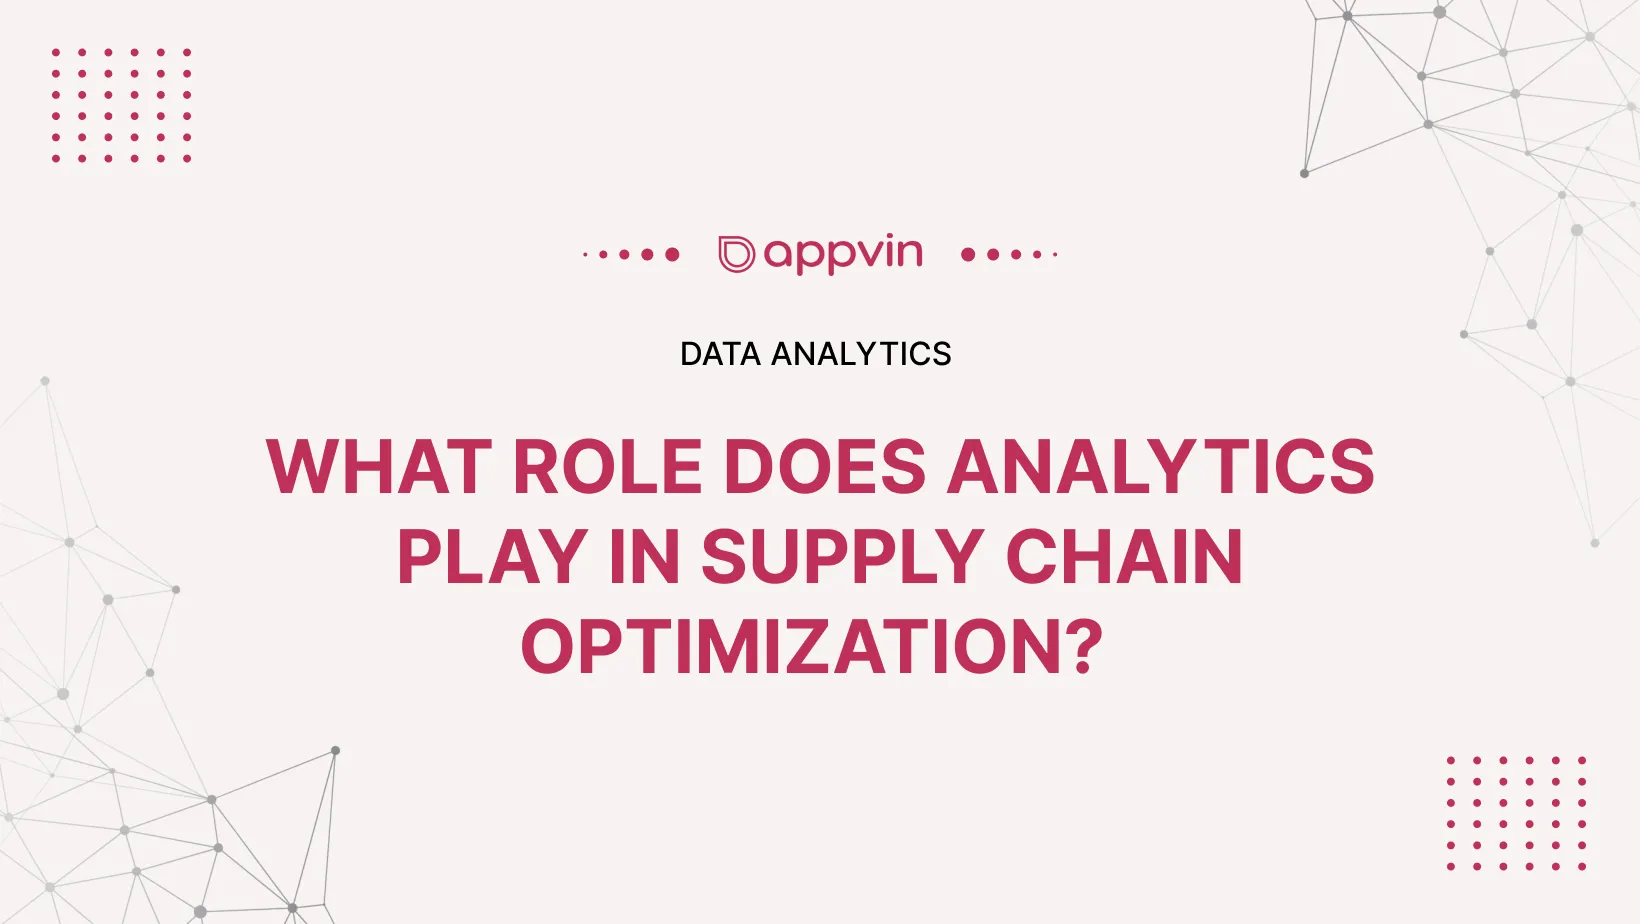 What role does analytics play in supply chain optimization?